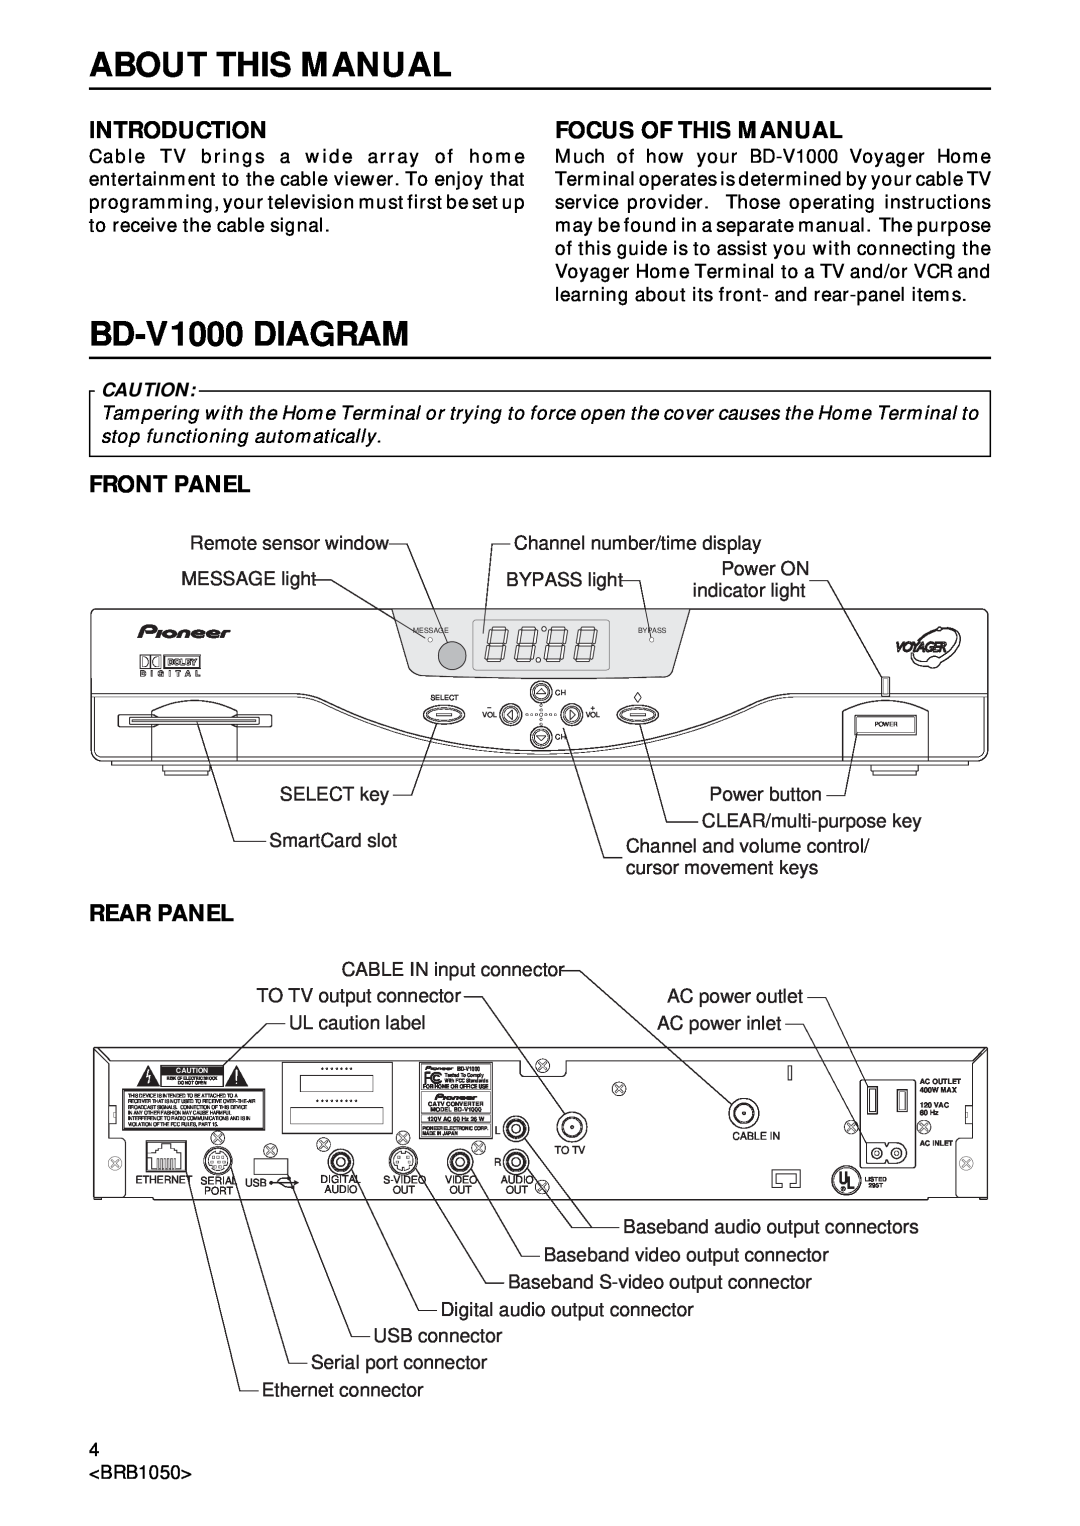 Pioneer Industrial BD-V1000 Series About This Manual, BD-V1000DIAGRAM, Introduction, Focus Of This Manual, Front Panel 